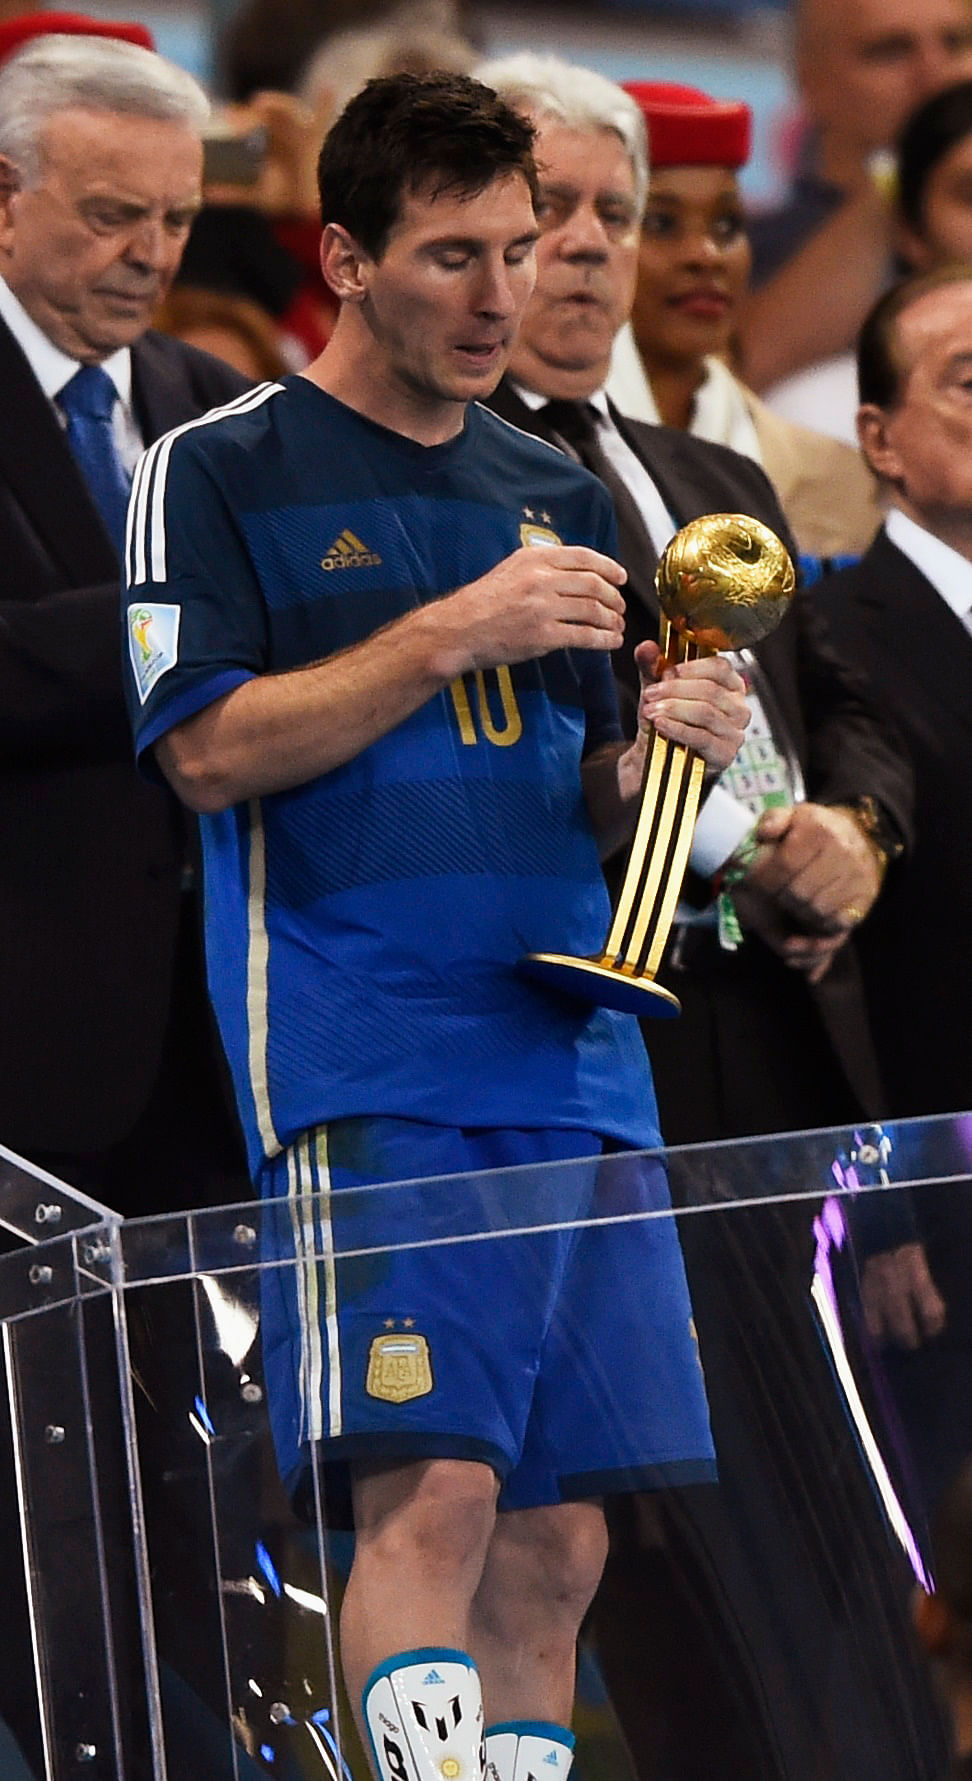 Argentina's Lionel Messi walks down the steps after receiving the Golden Ball for being the best player at the end of the 2014 World Cup final between Germany and Argentina at the Maracana stadium in Rio de Janeiro on July 13, 2014. Reuters